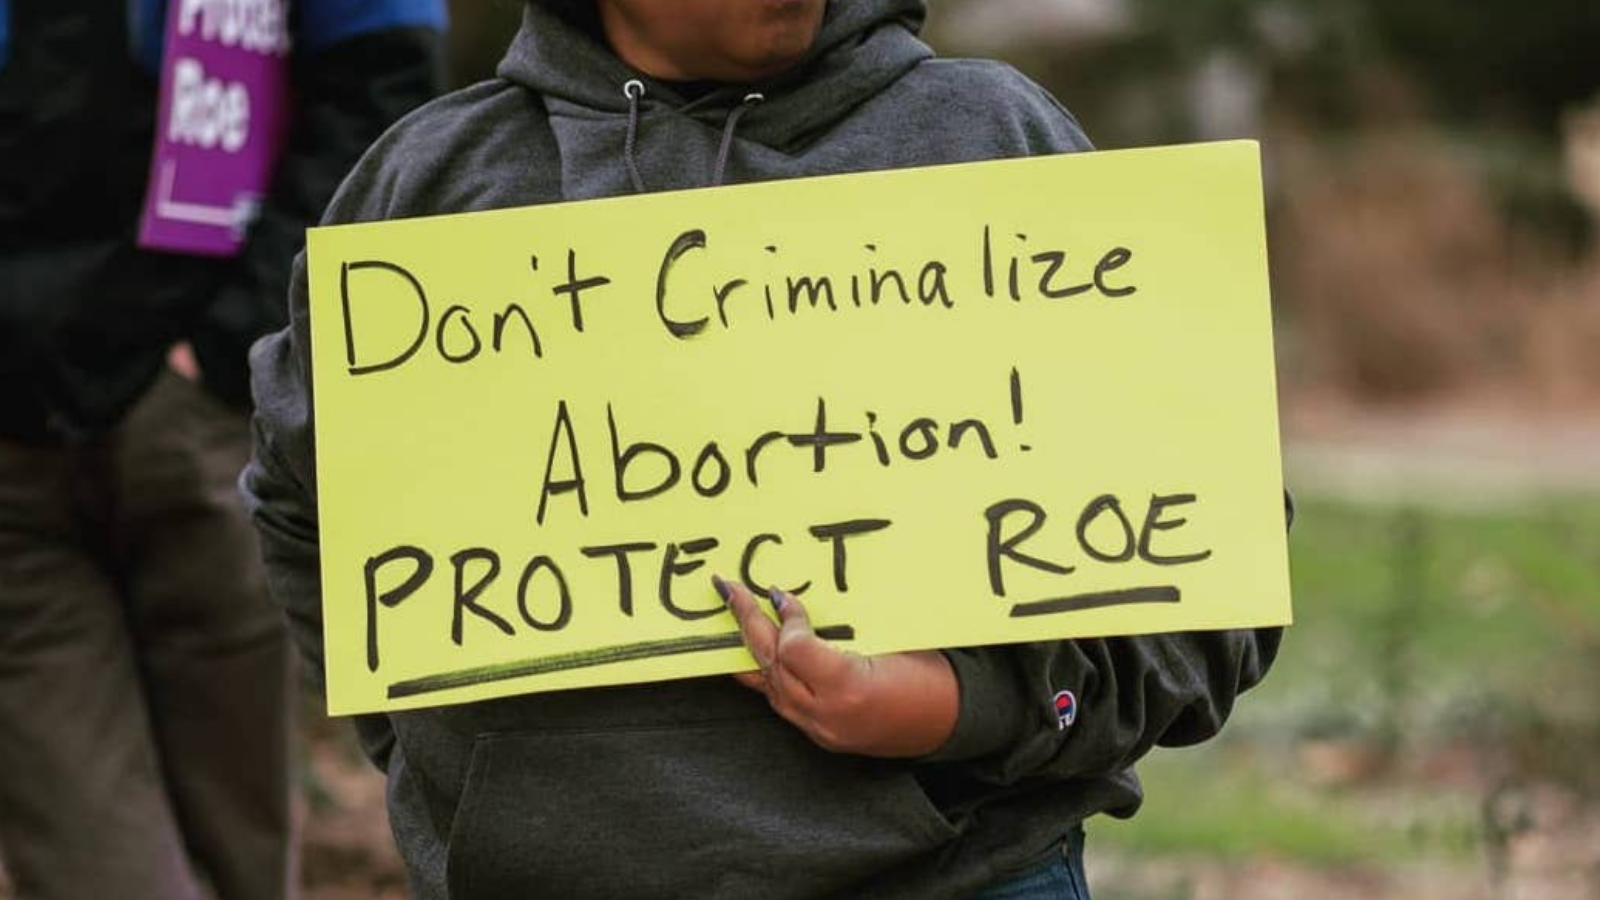 sign reads 'Don't criminalize abortion! protect Roe'